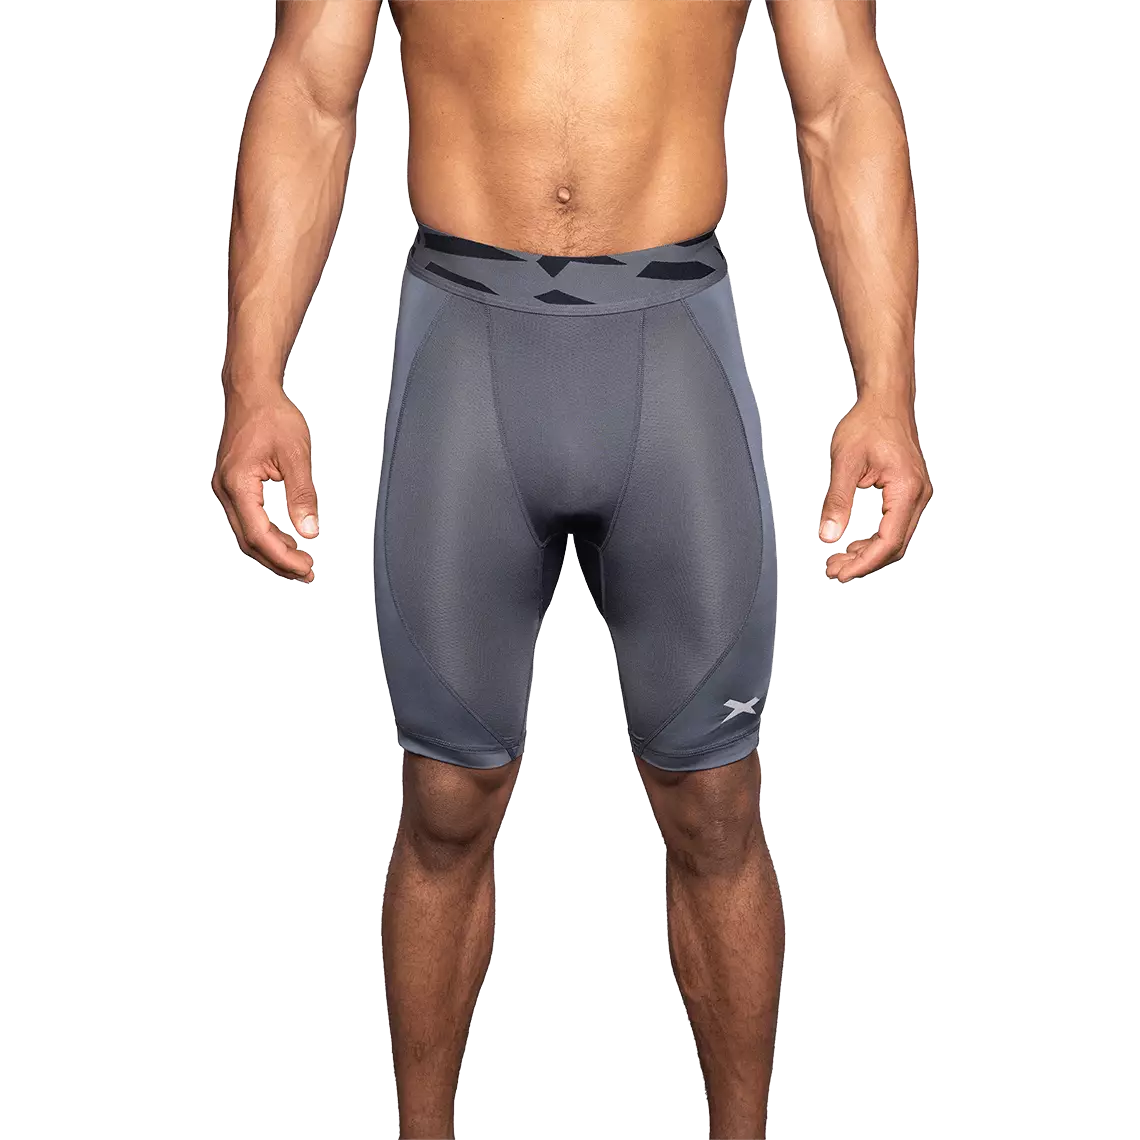 Black compression short on male model, from rear.